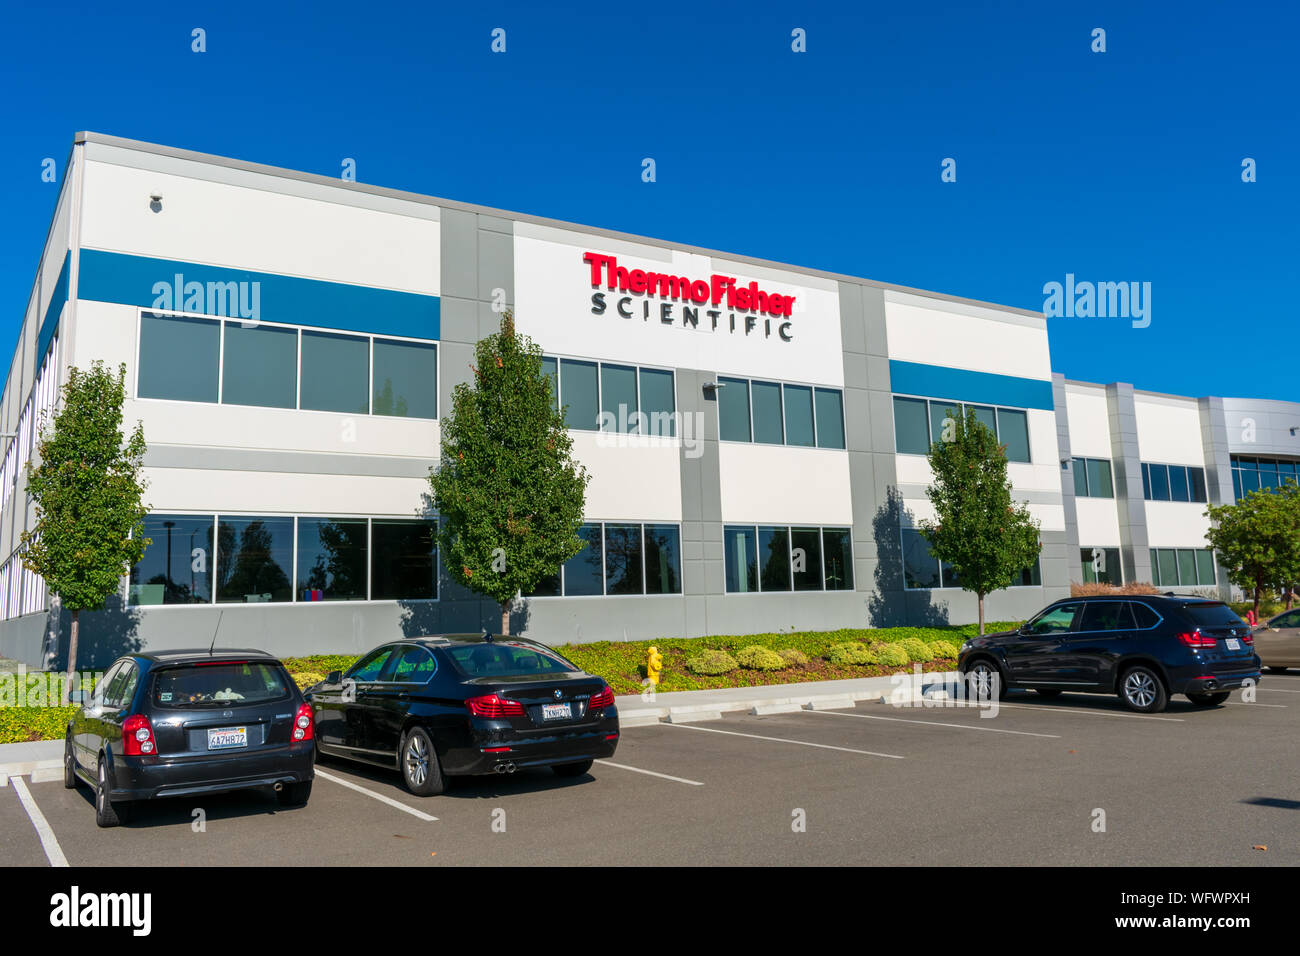 Thermo Fisher Scientific company office in Silicon Valley, high-tech hub of San Francisco Bay Area Stock Photo